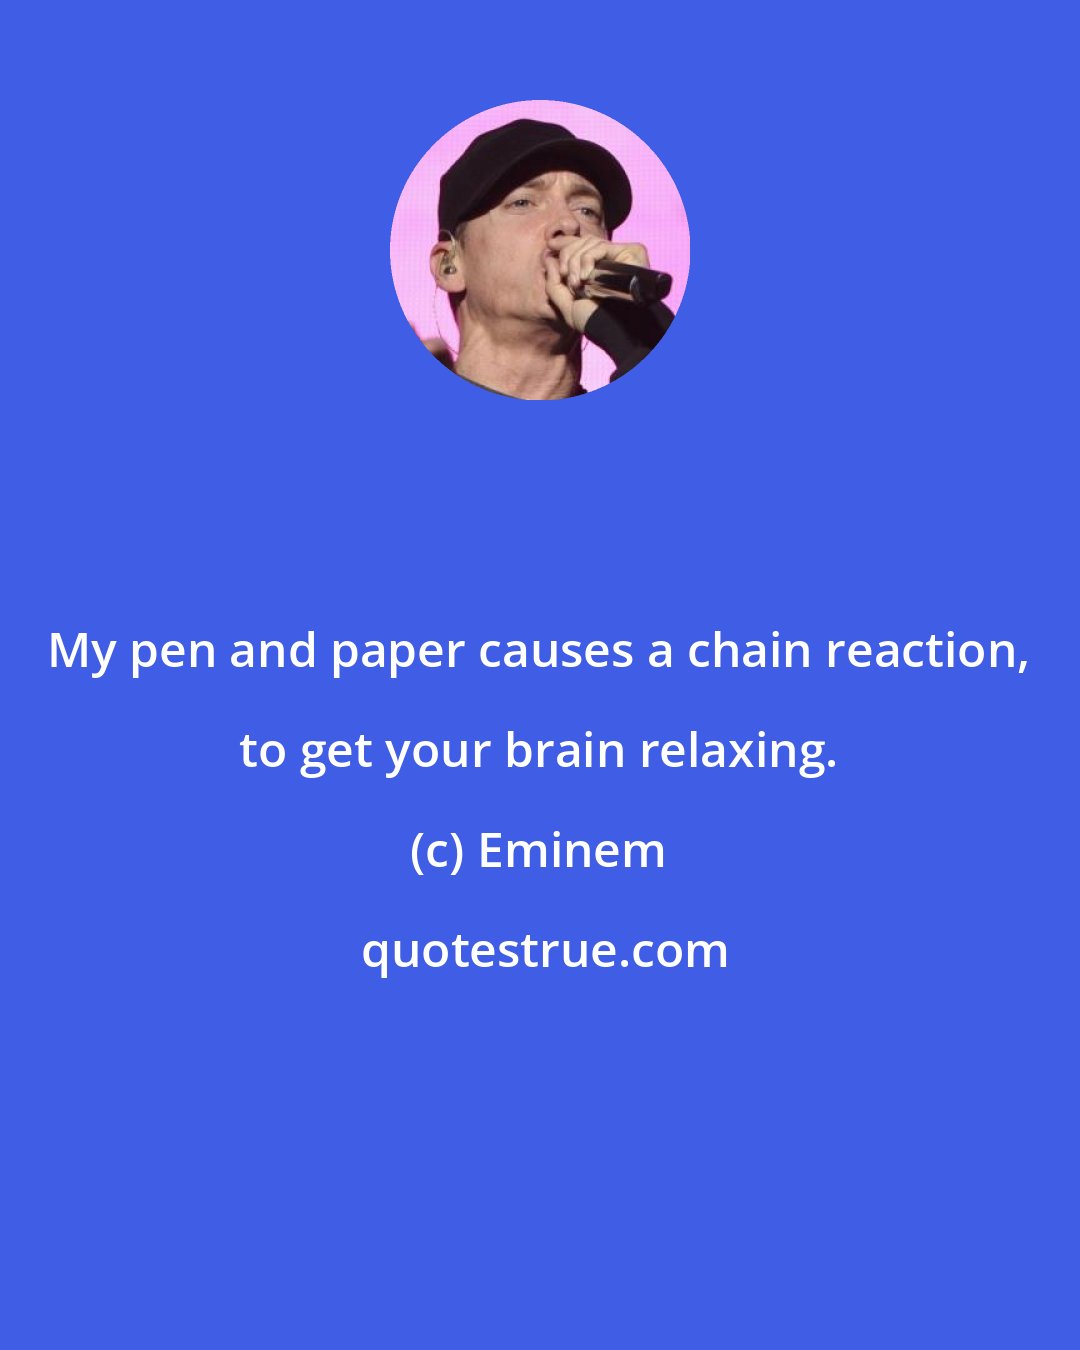 Eminem: My pen and paper causes a chain reaction, to get your brain relaxing.